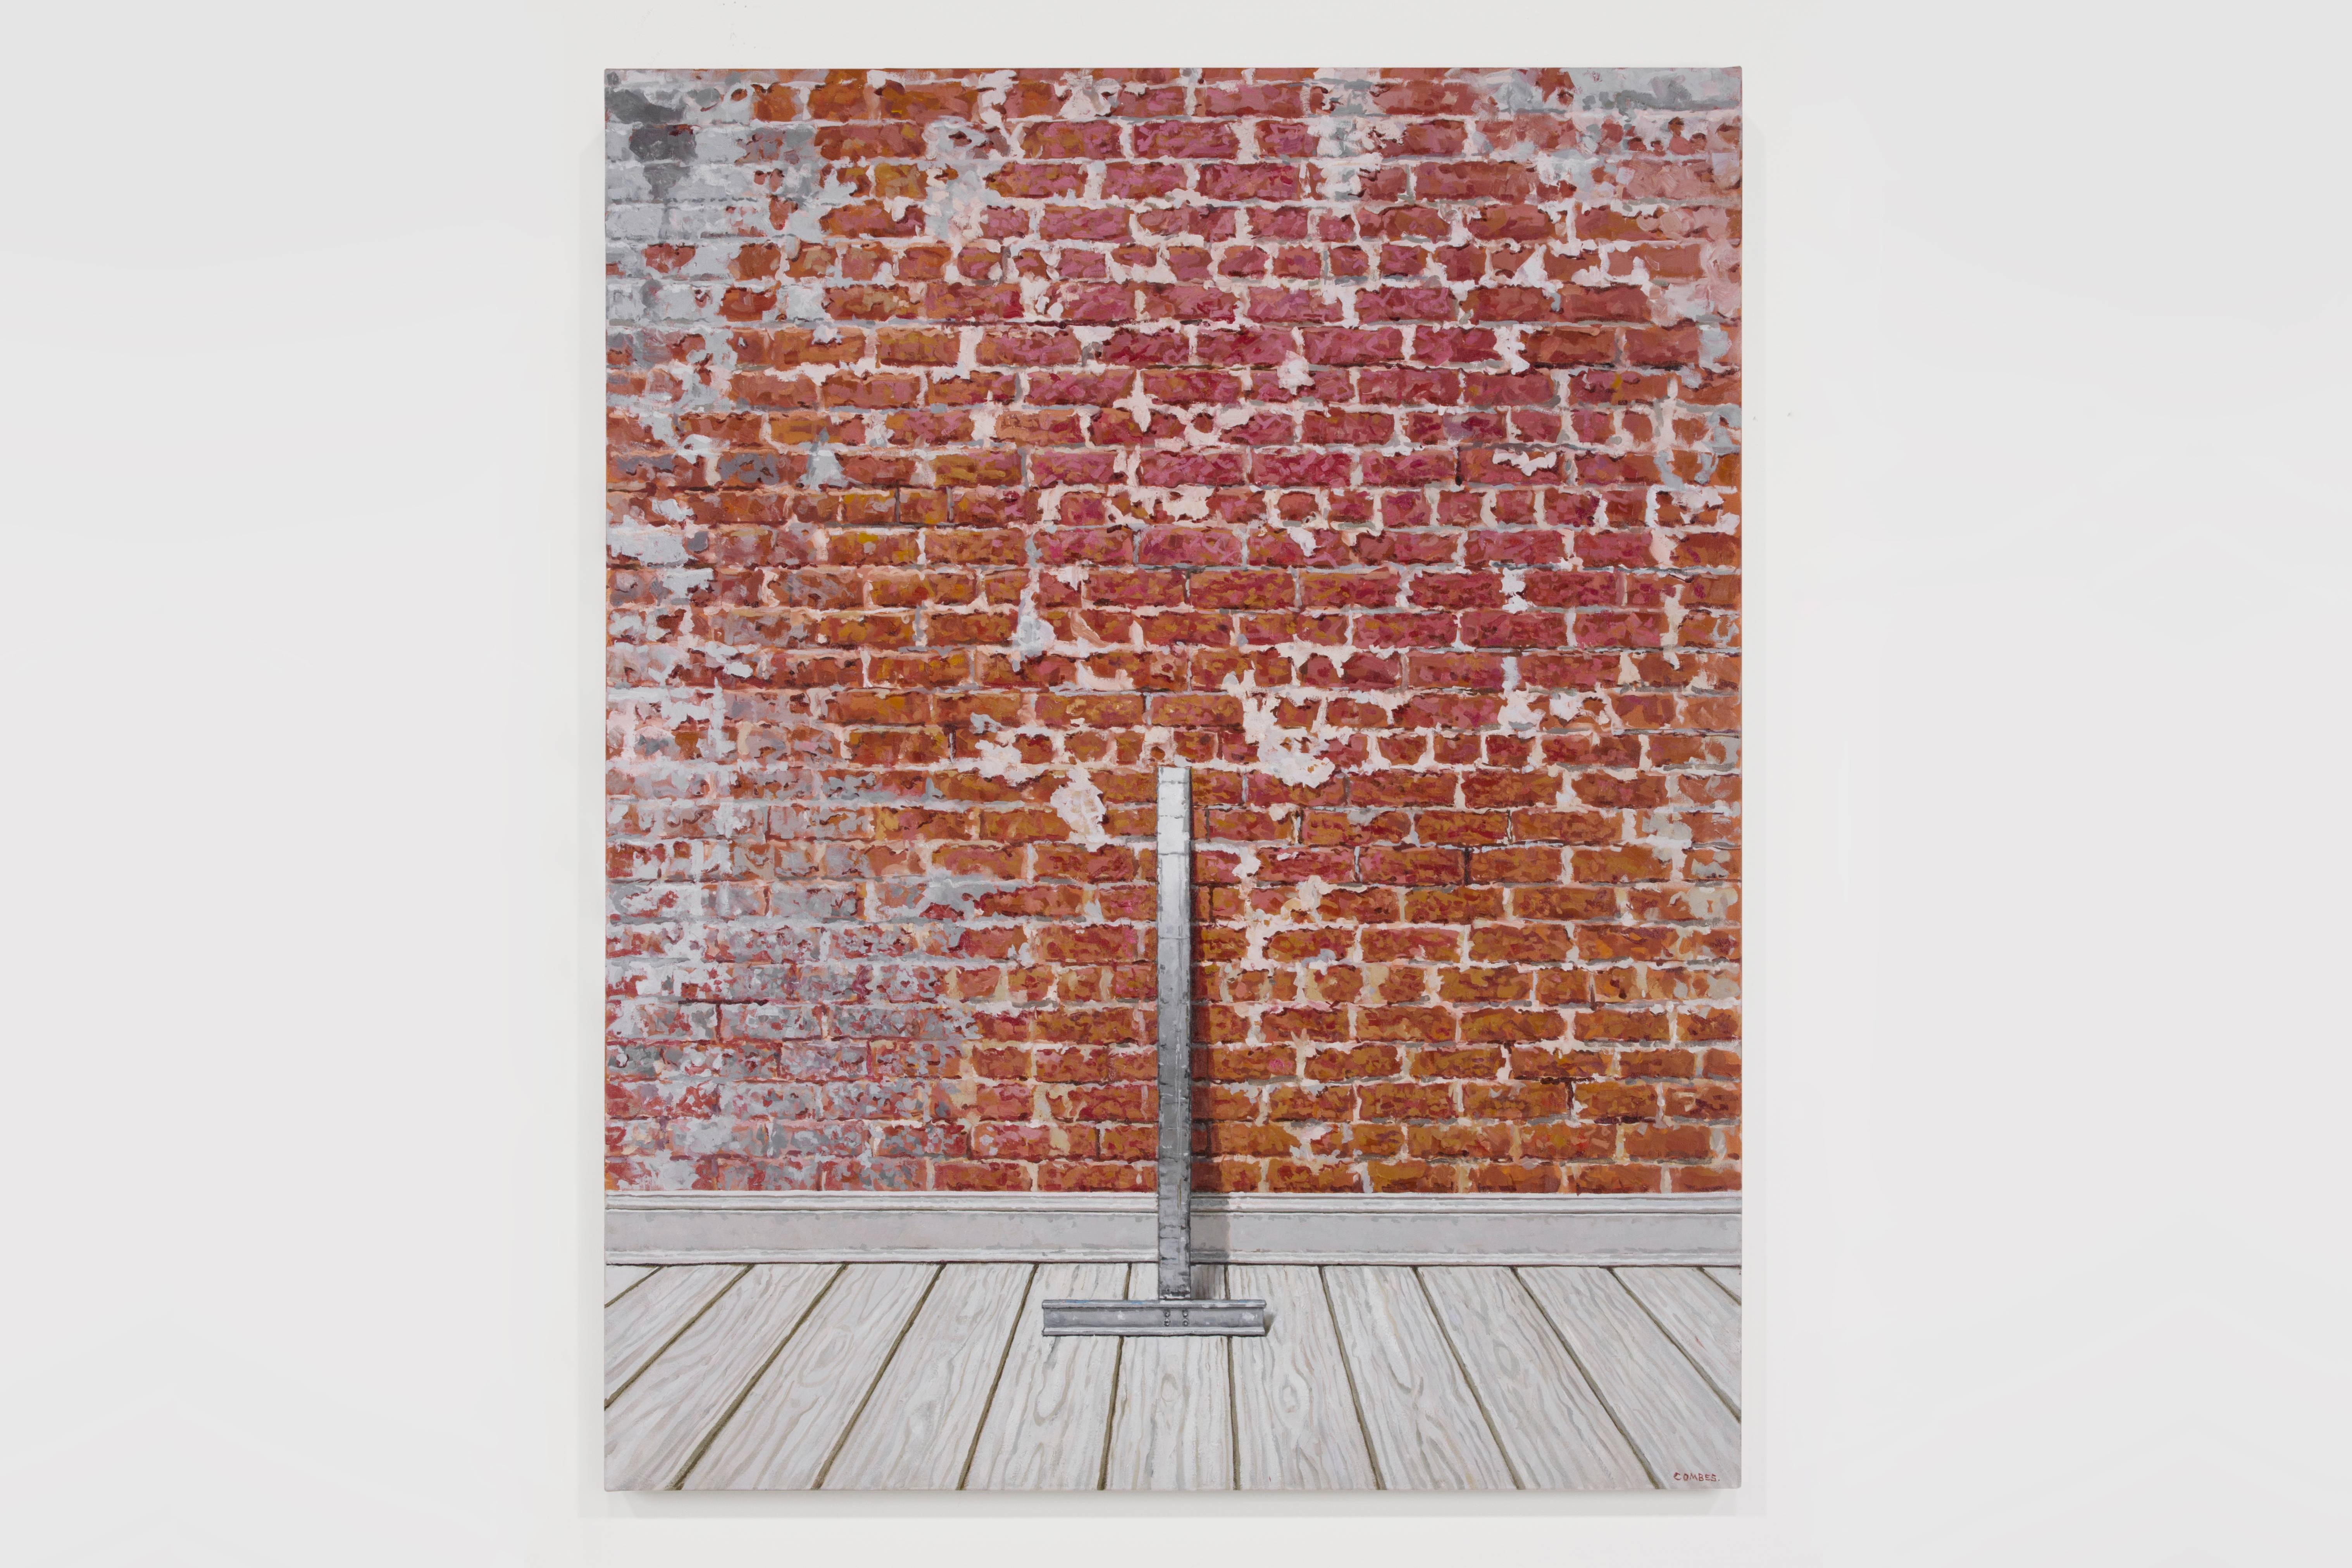 CENTER POINT - Photorealism / Exposed Red Brick Wall / Contrast - Painting by Richard Combes